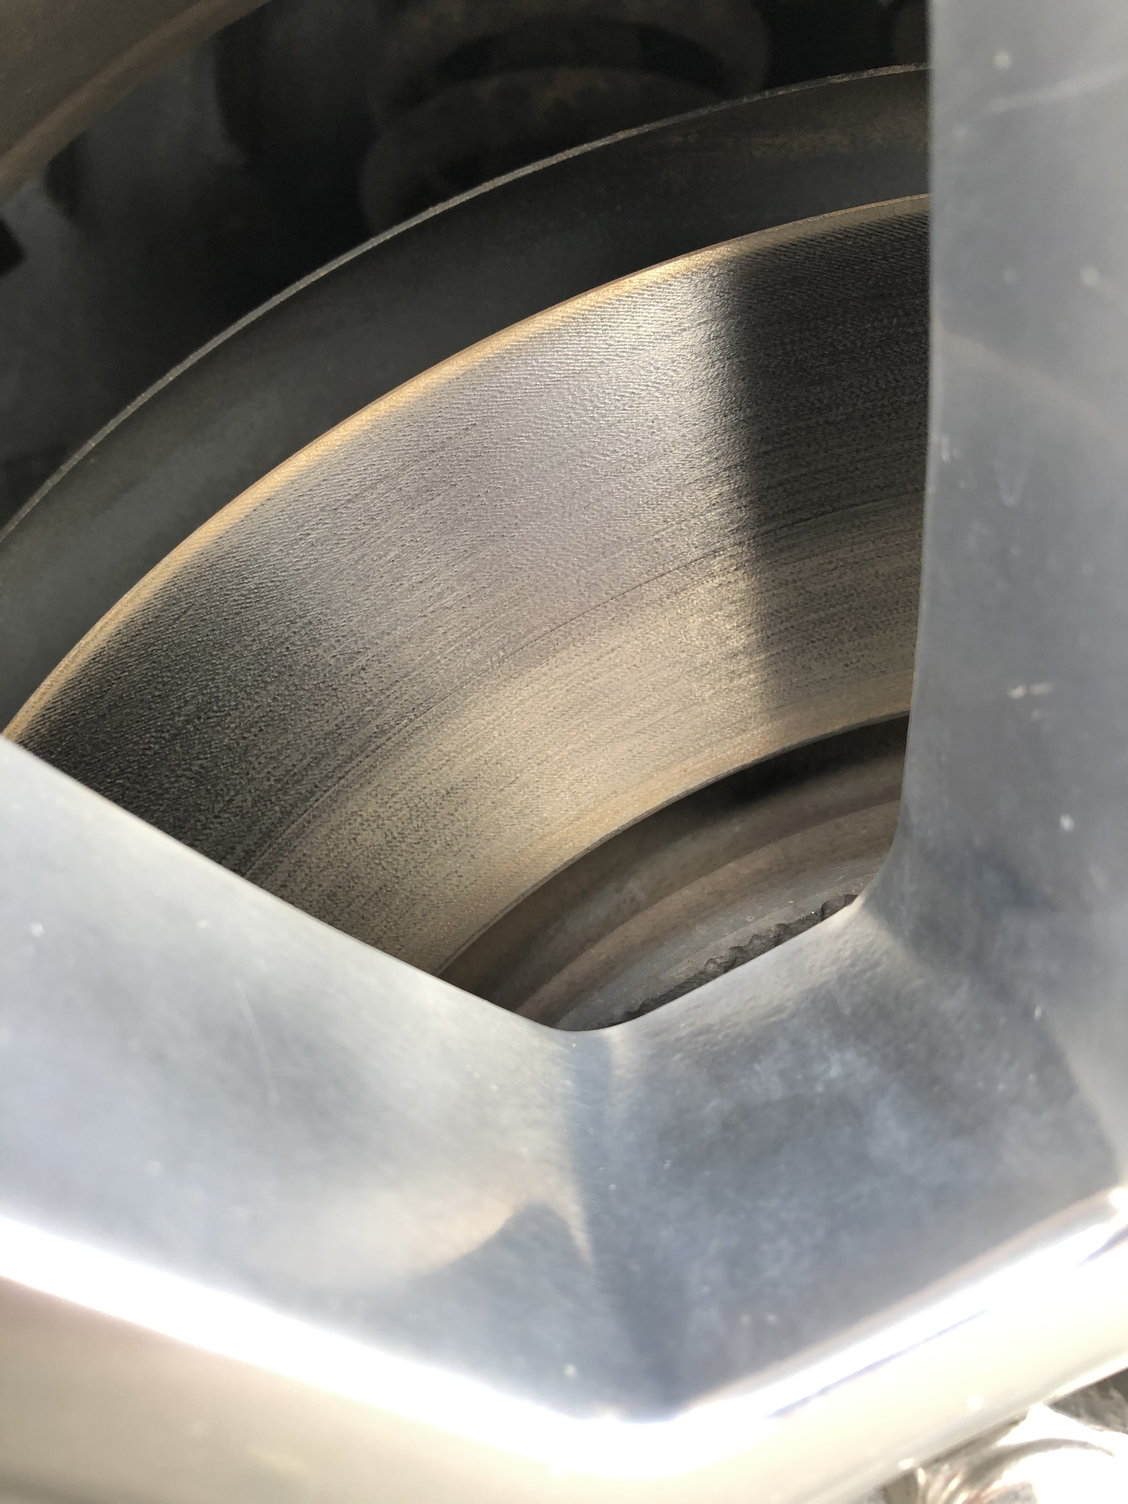 2015 f150 uneven pad wear with new brakes and resurfaced rotors - Ford F150  Forum - Community of Ford Truck Fans